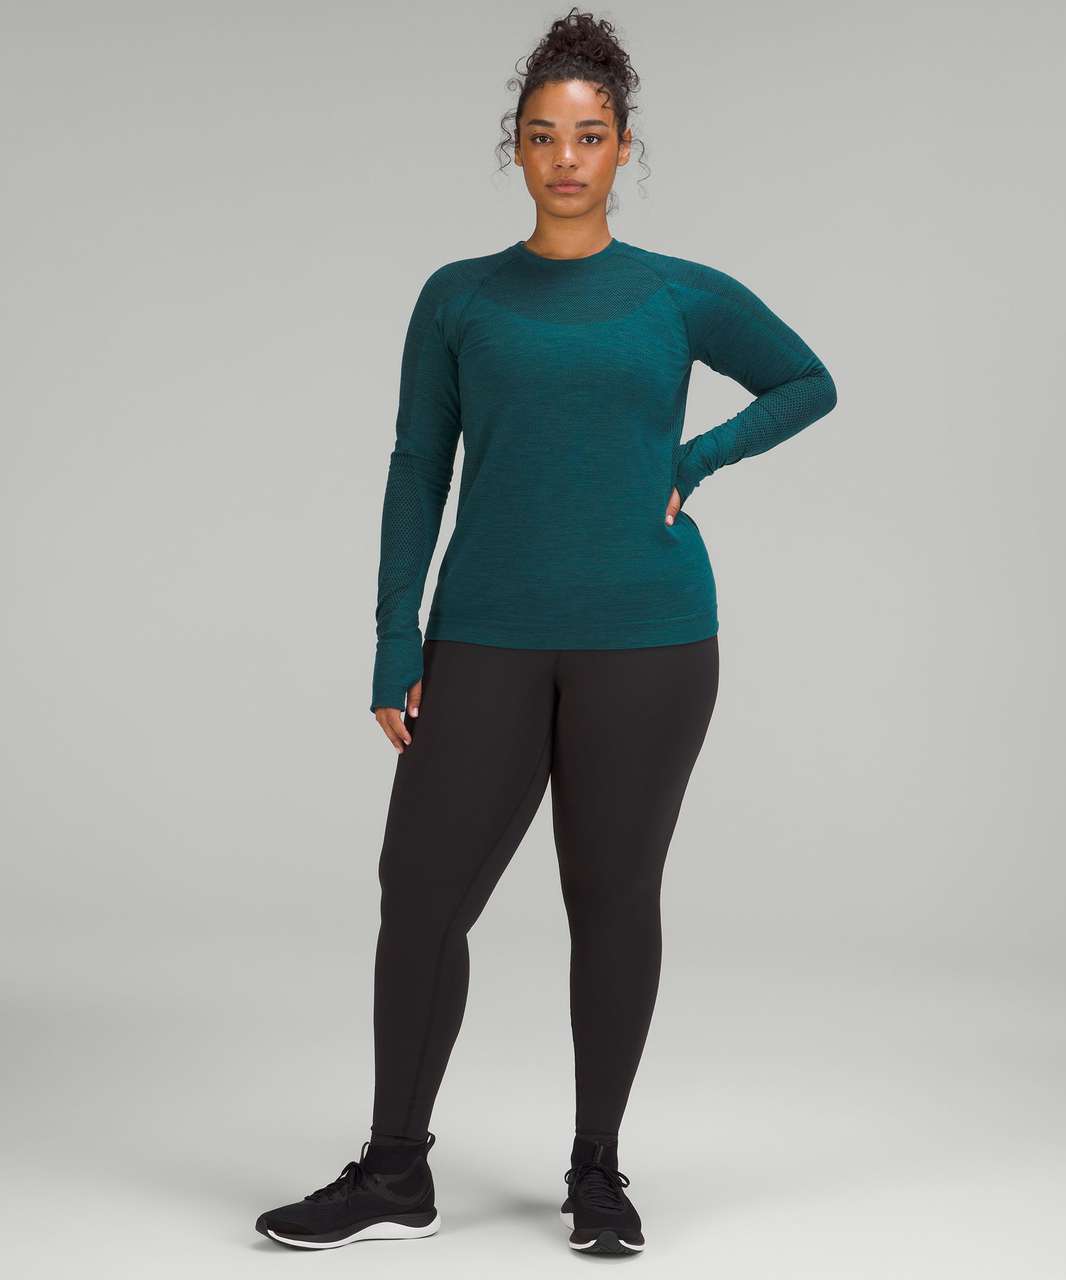 Lululemon Keep the Heat Thermal High-Rise Tight 27 - Green Twill